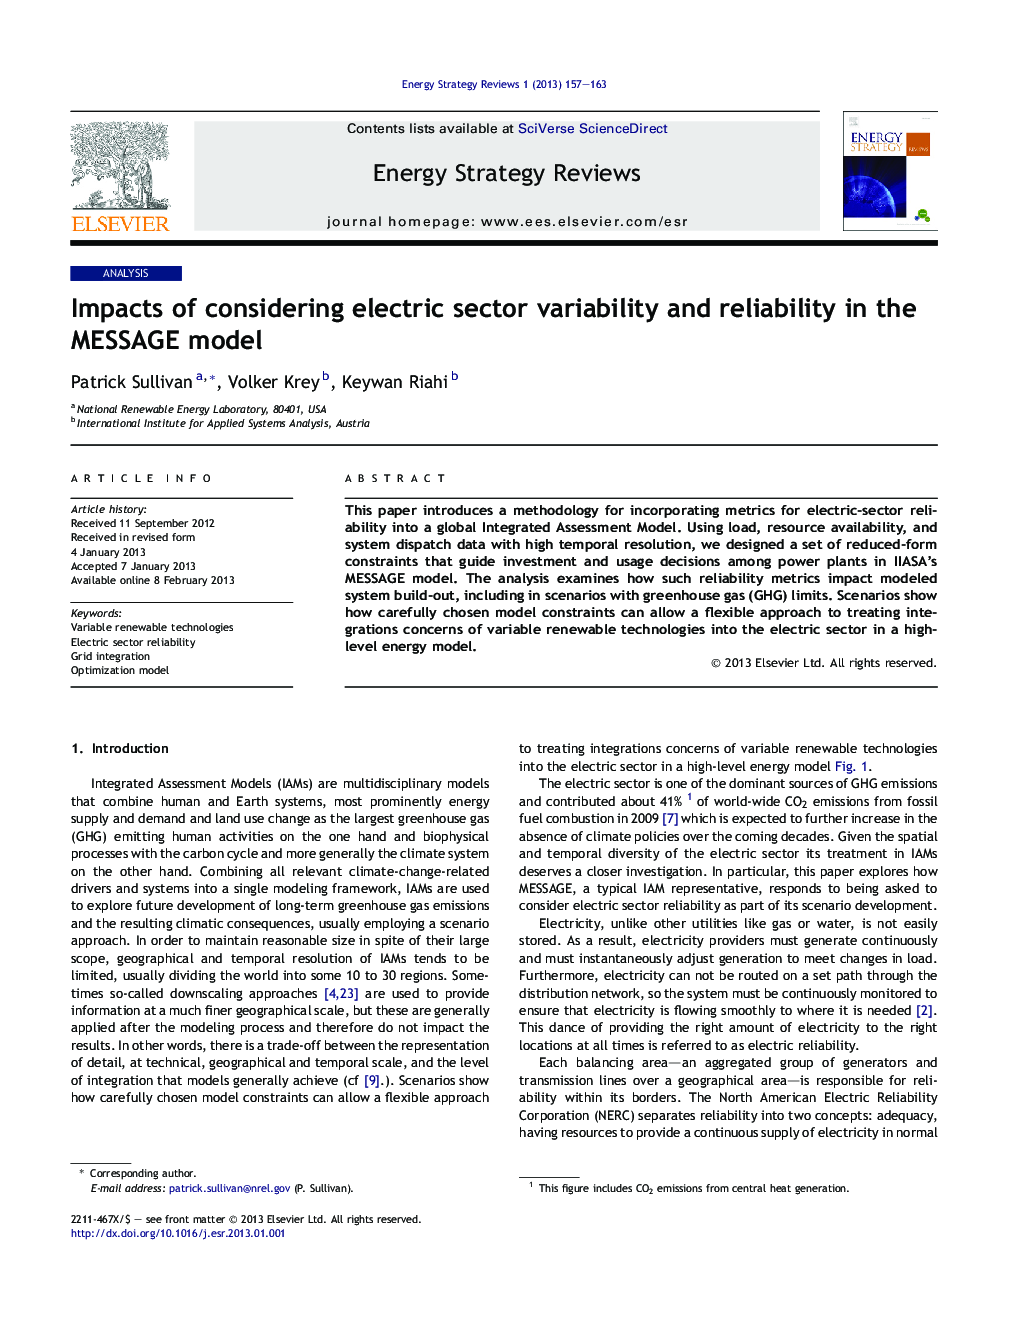 Impacts of considering electric sector variability and reliability in the MESSAGE model